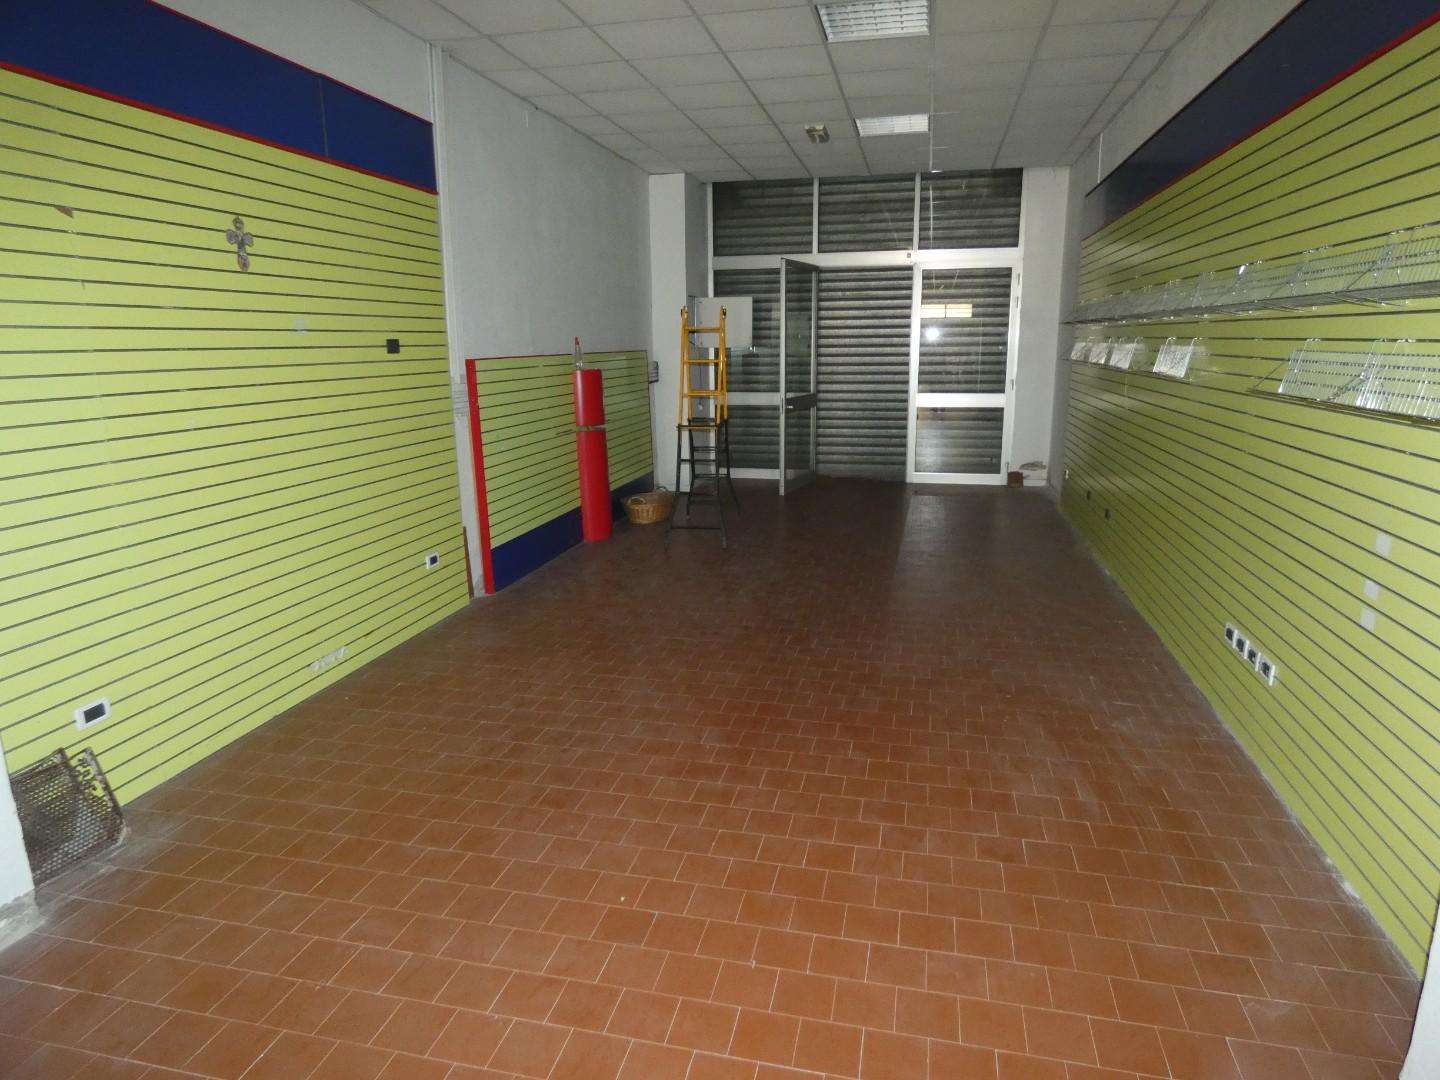 Locale commerciale in Affitto a Pontedera SS,